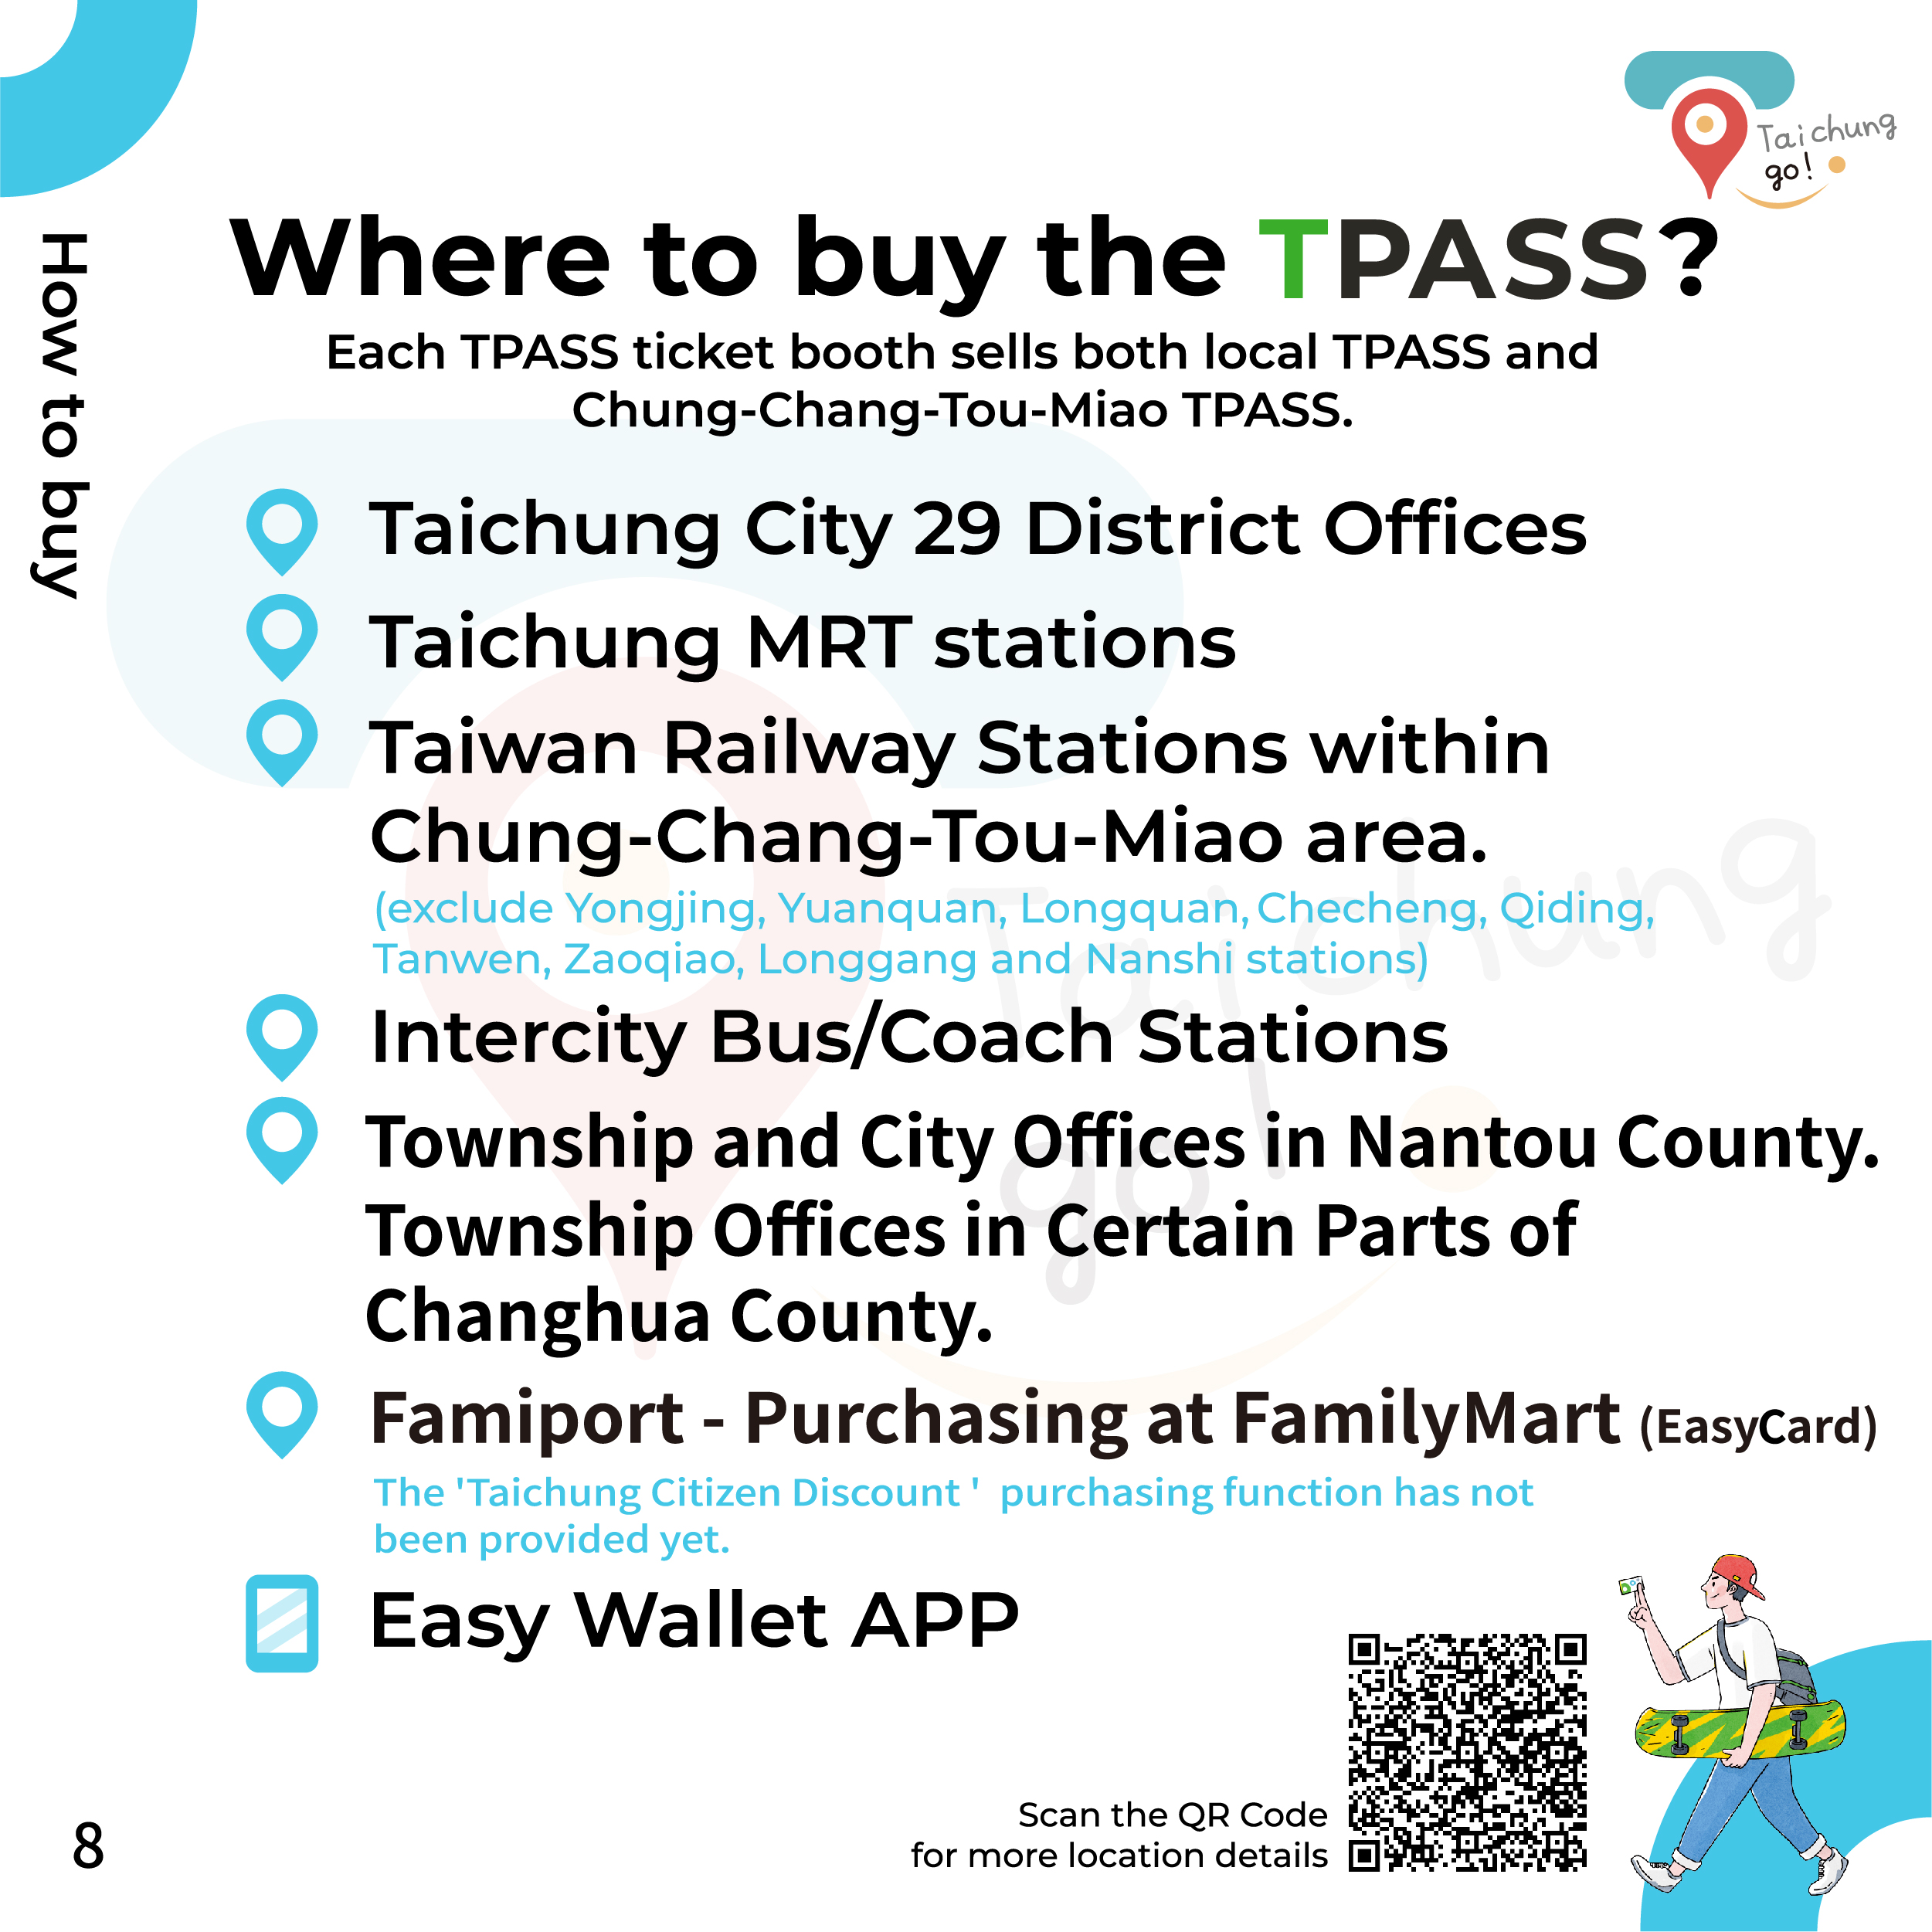 Where to buy the TPASS